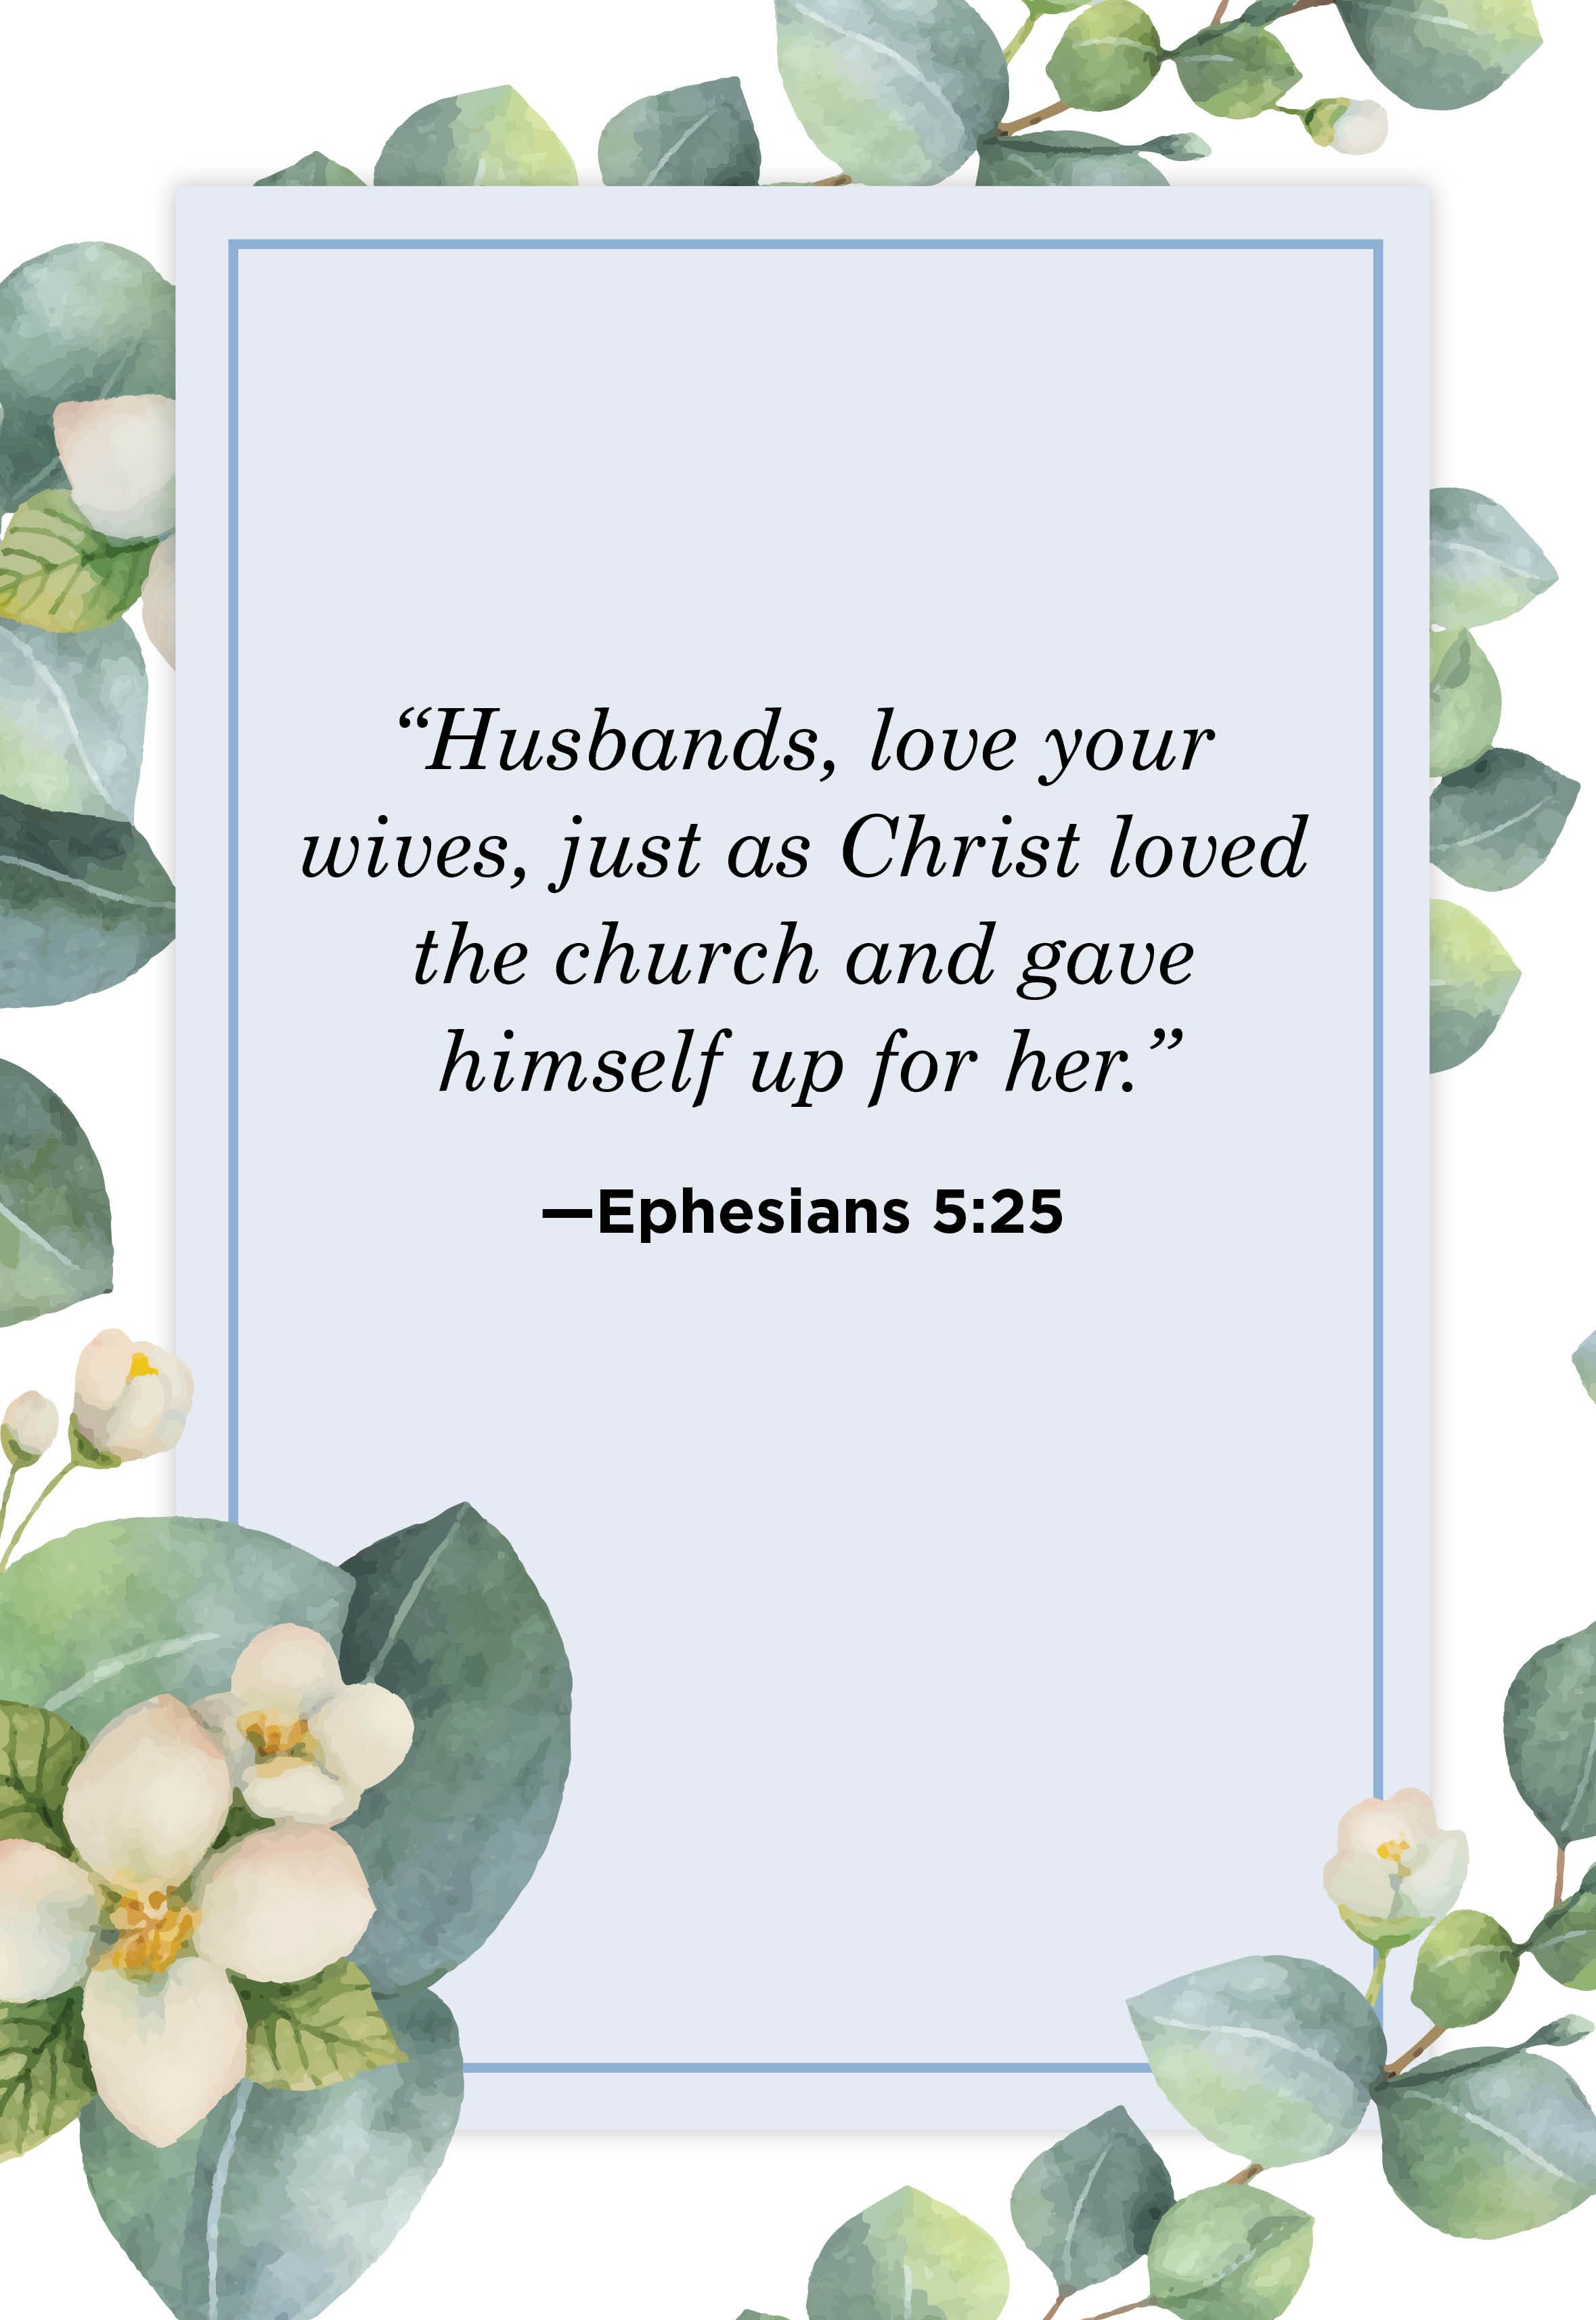 Bible Verses About Marriage Ephesians 5 25 64e62f2246fc4 